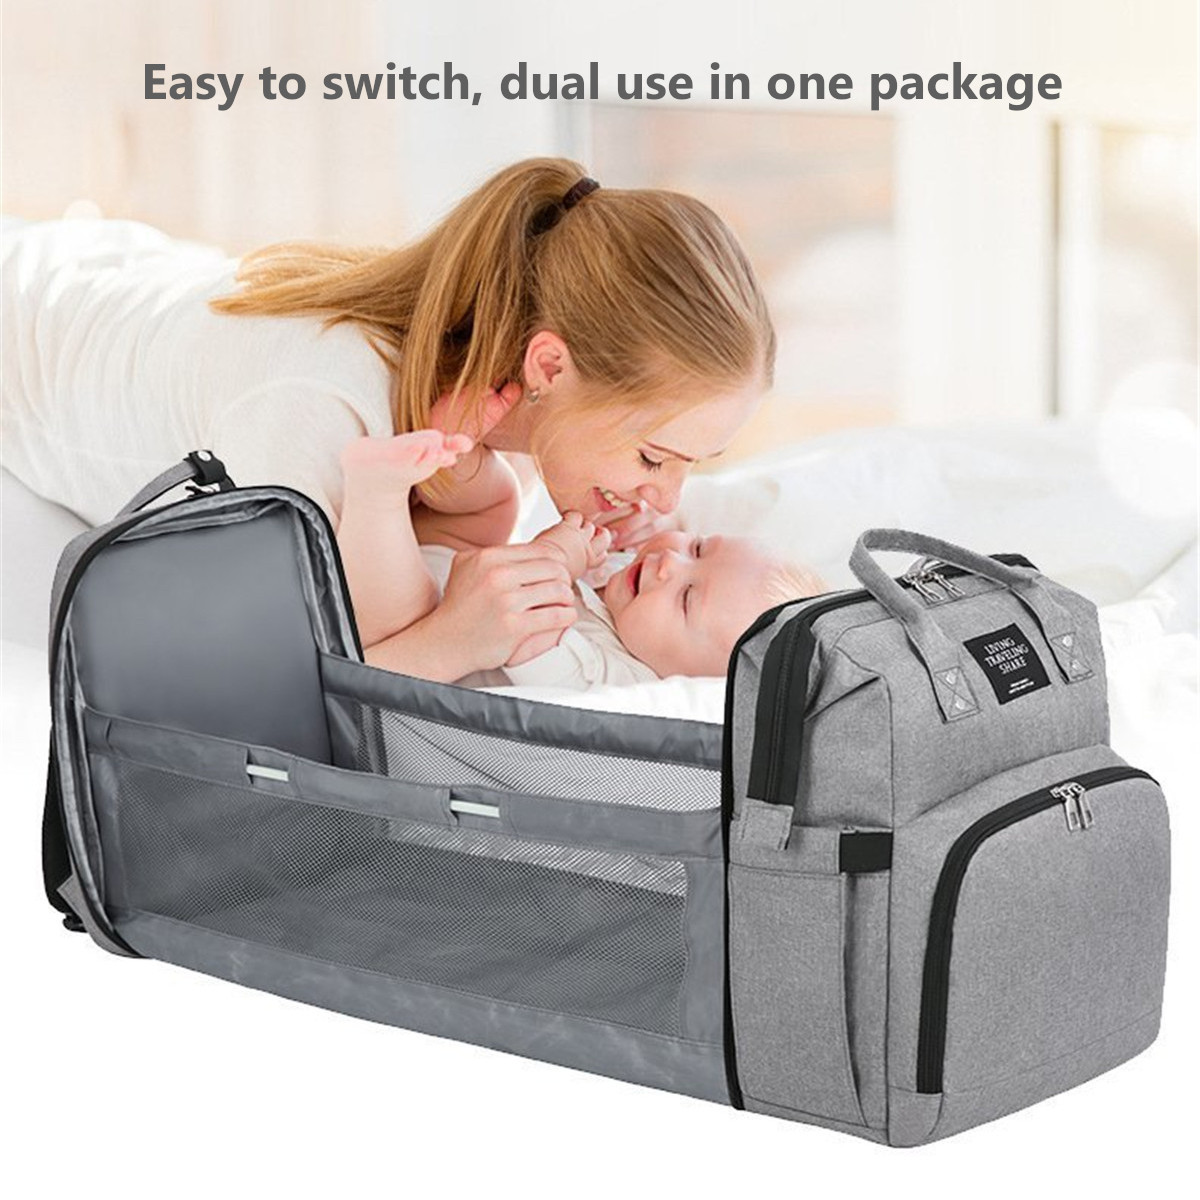 Multifunctional-Waterproof-Mummy-Bag-Portable-Diaper-Bag-Large-capacity-Folding-Bed-Bag-Out-of-bed-B-1916752-2